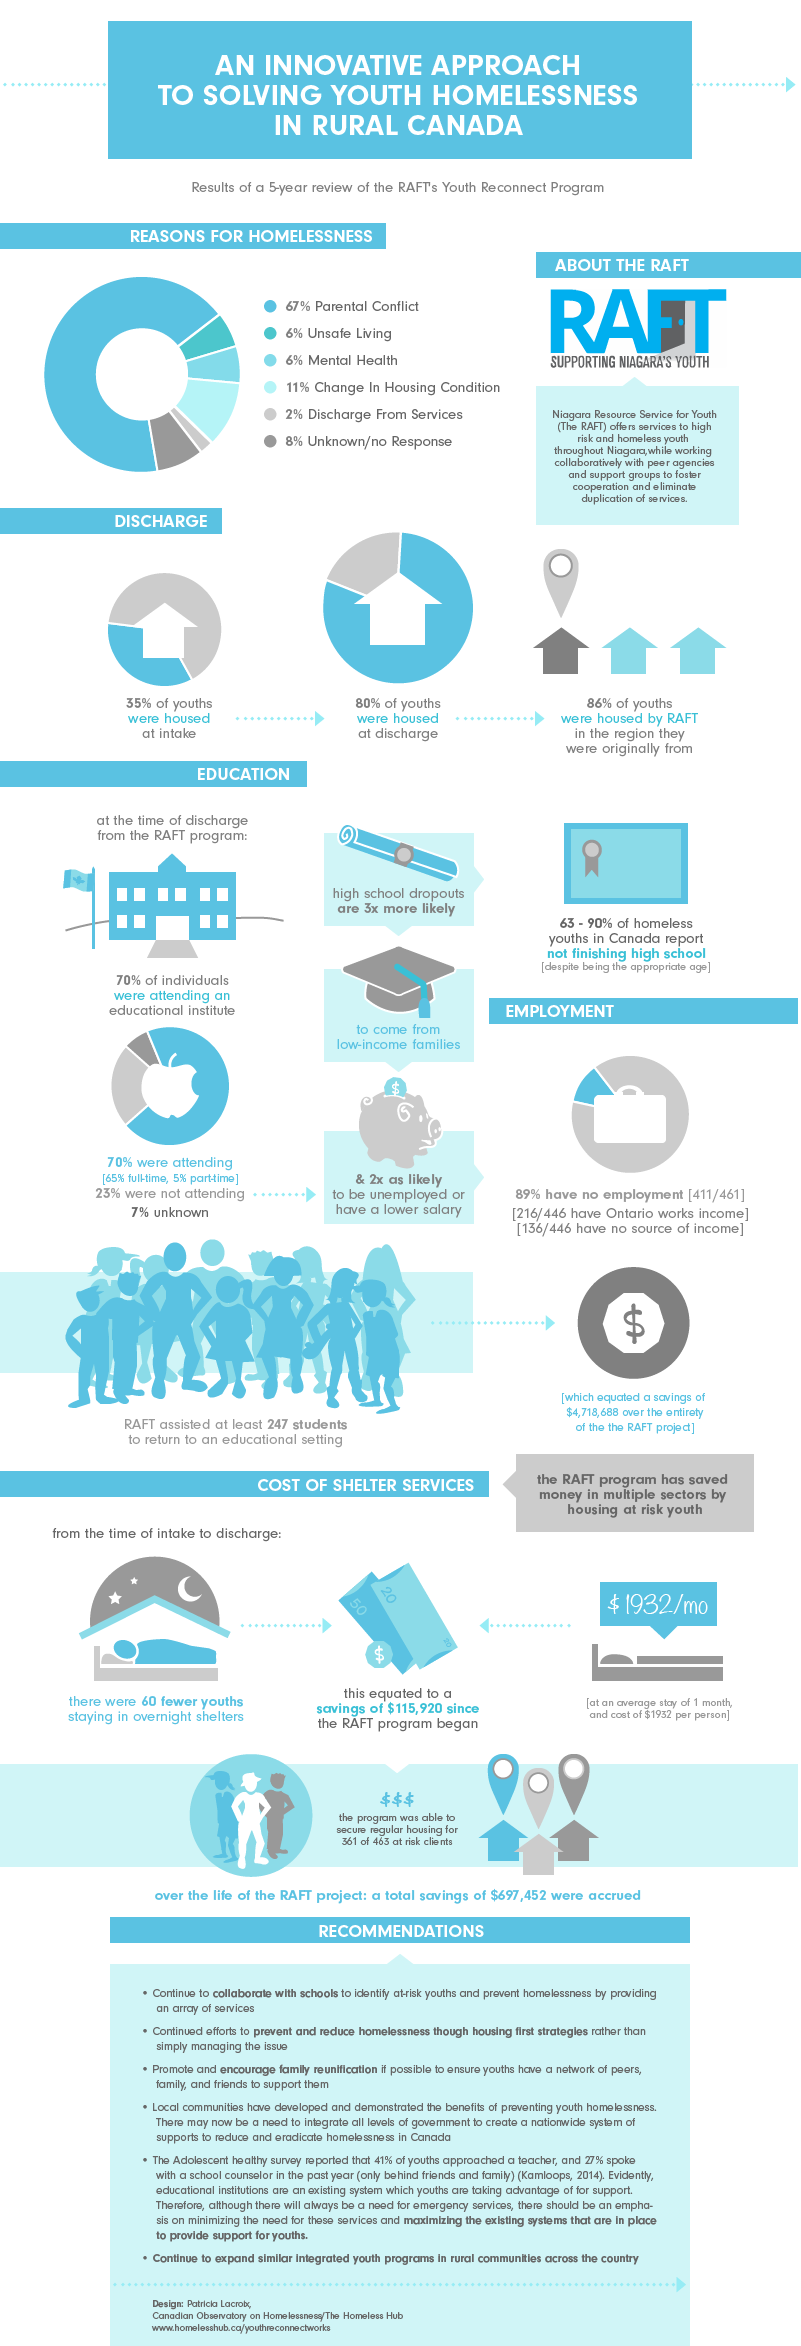 An innovative approach to solving youth homelessness in rural Canada infographic